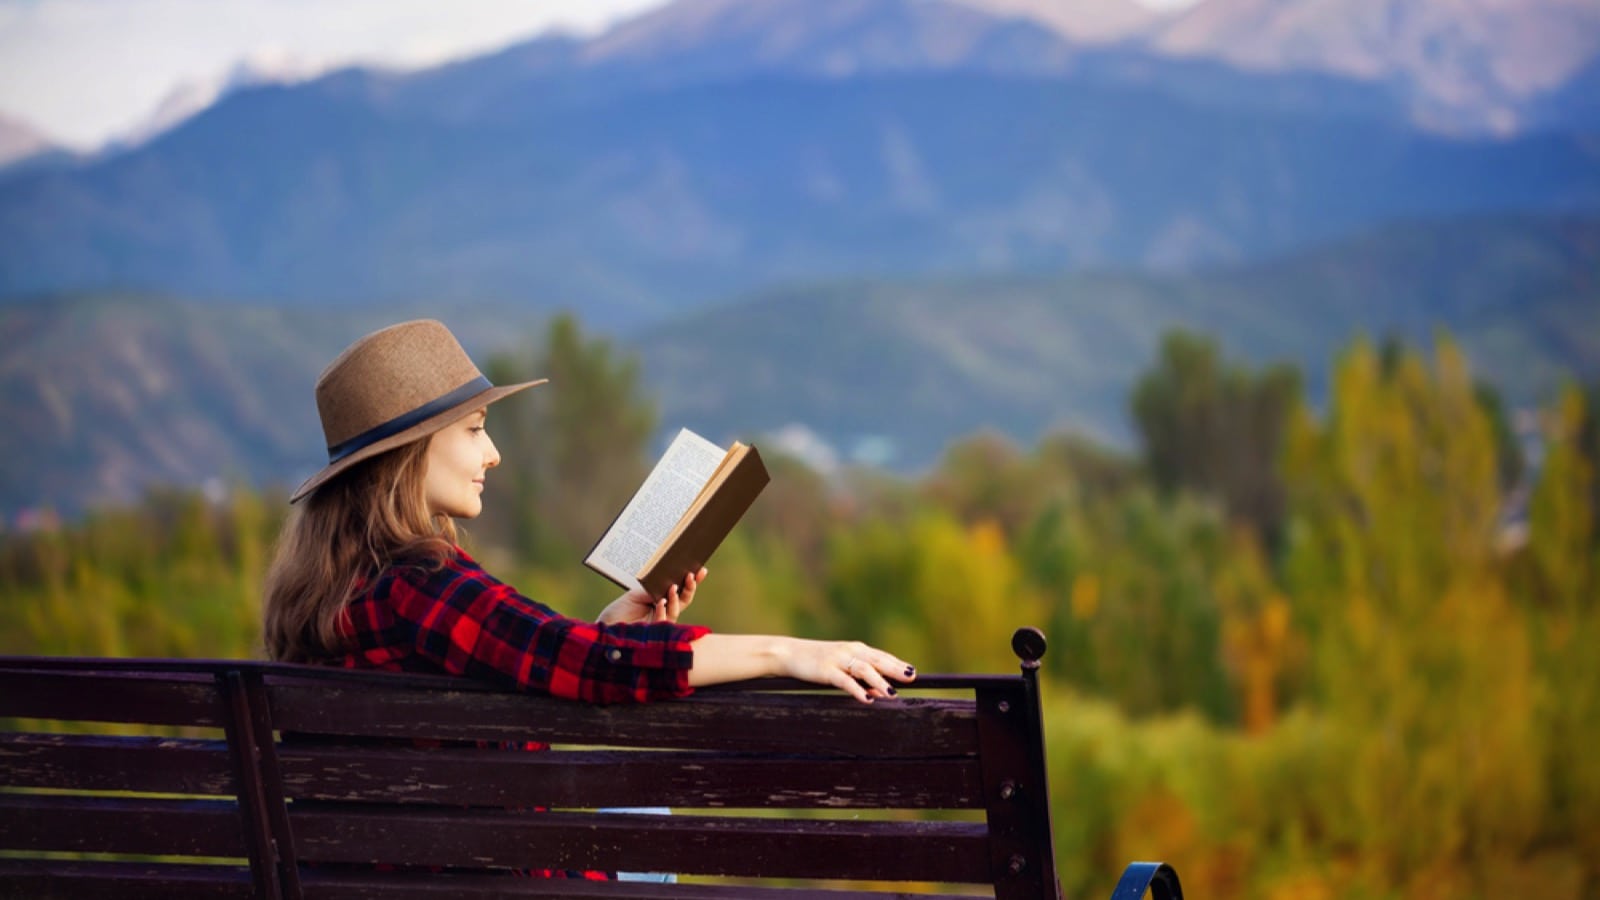 Woman siting in park reading book